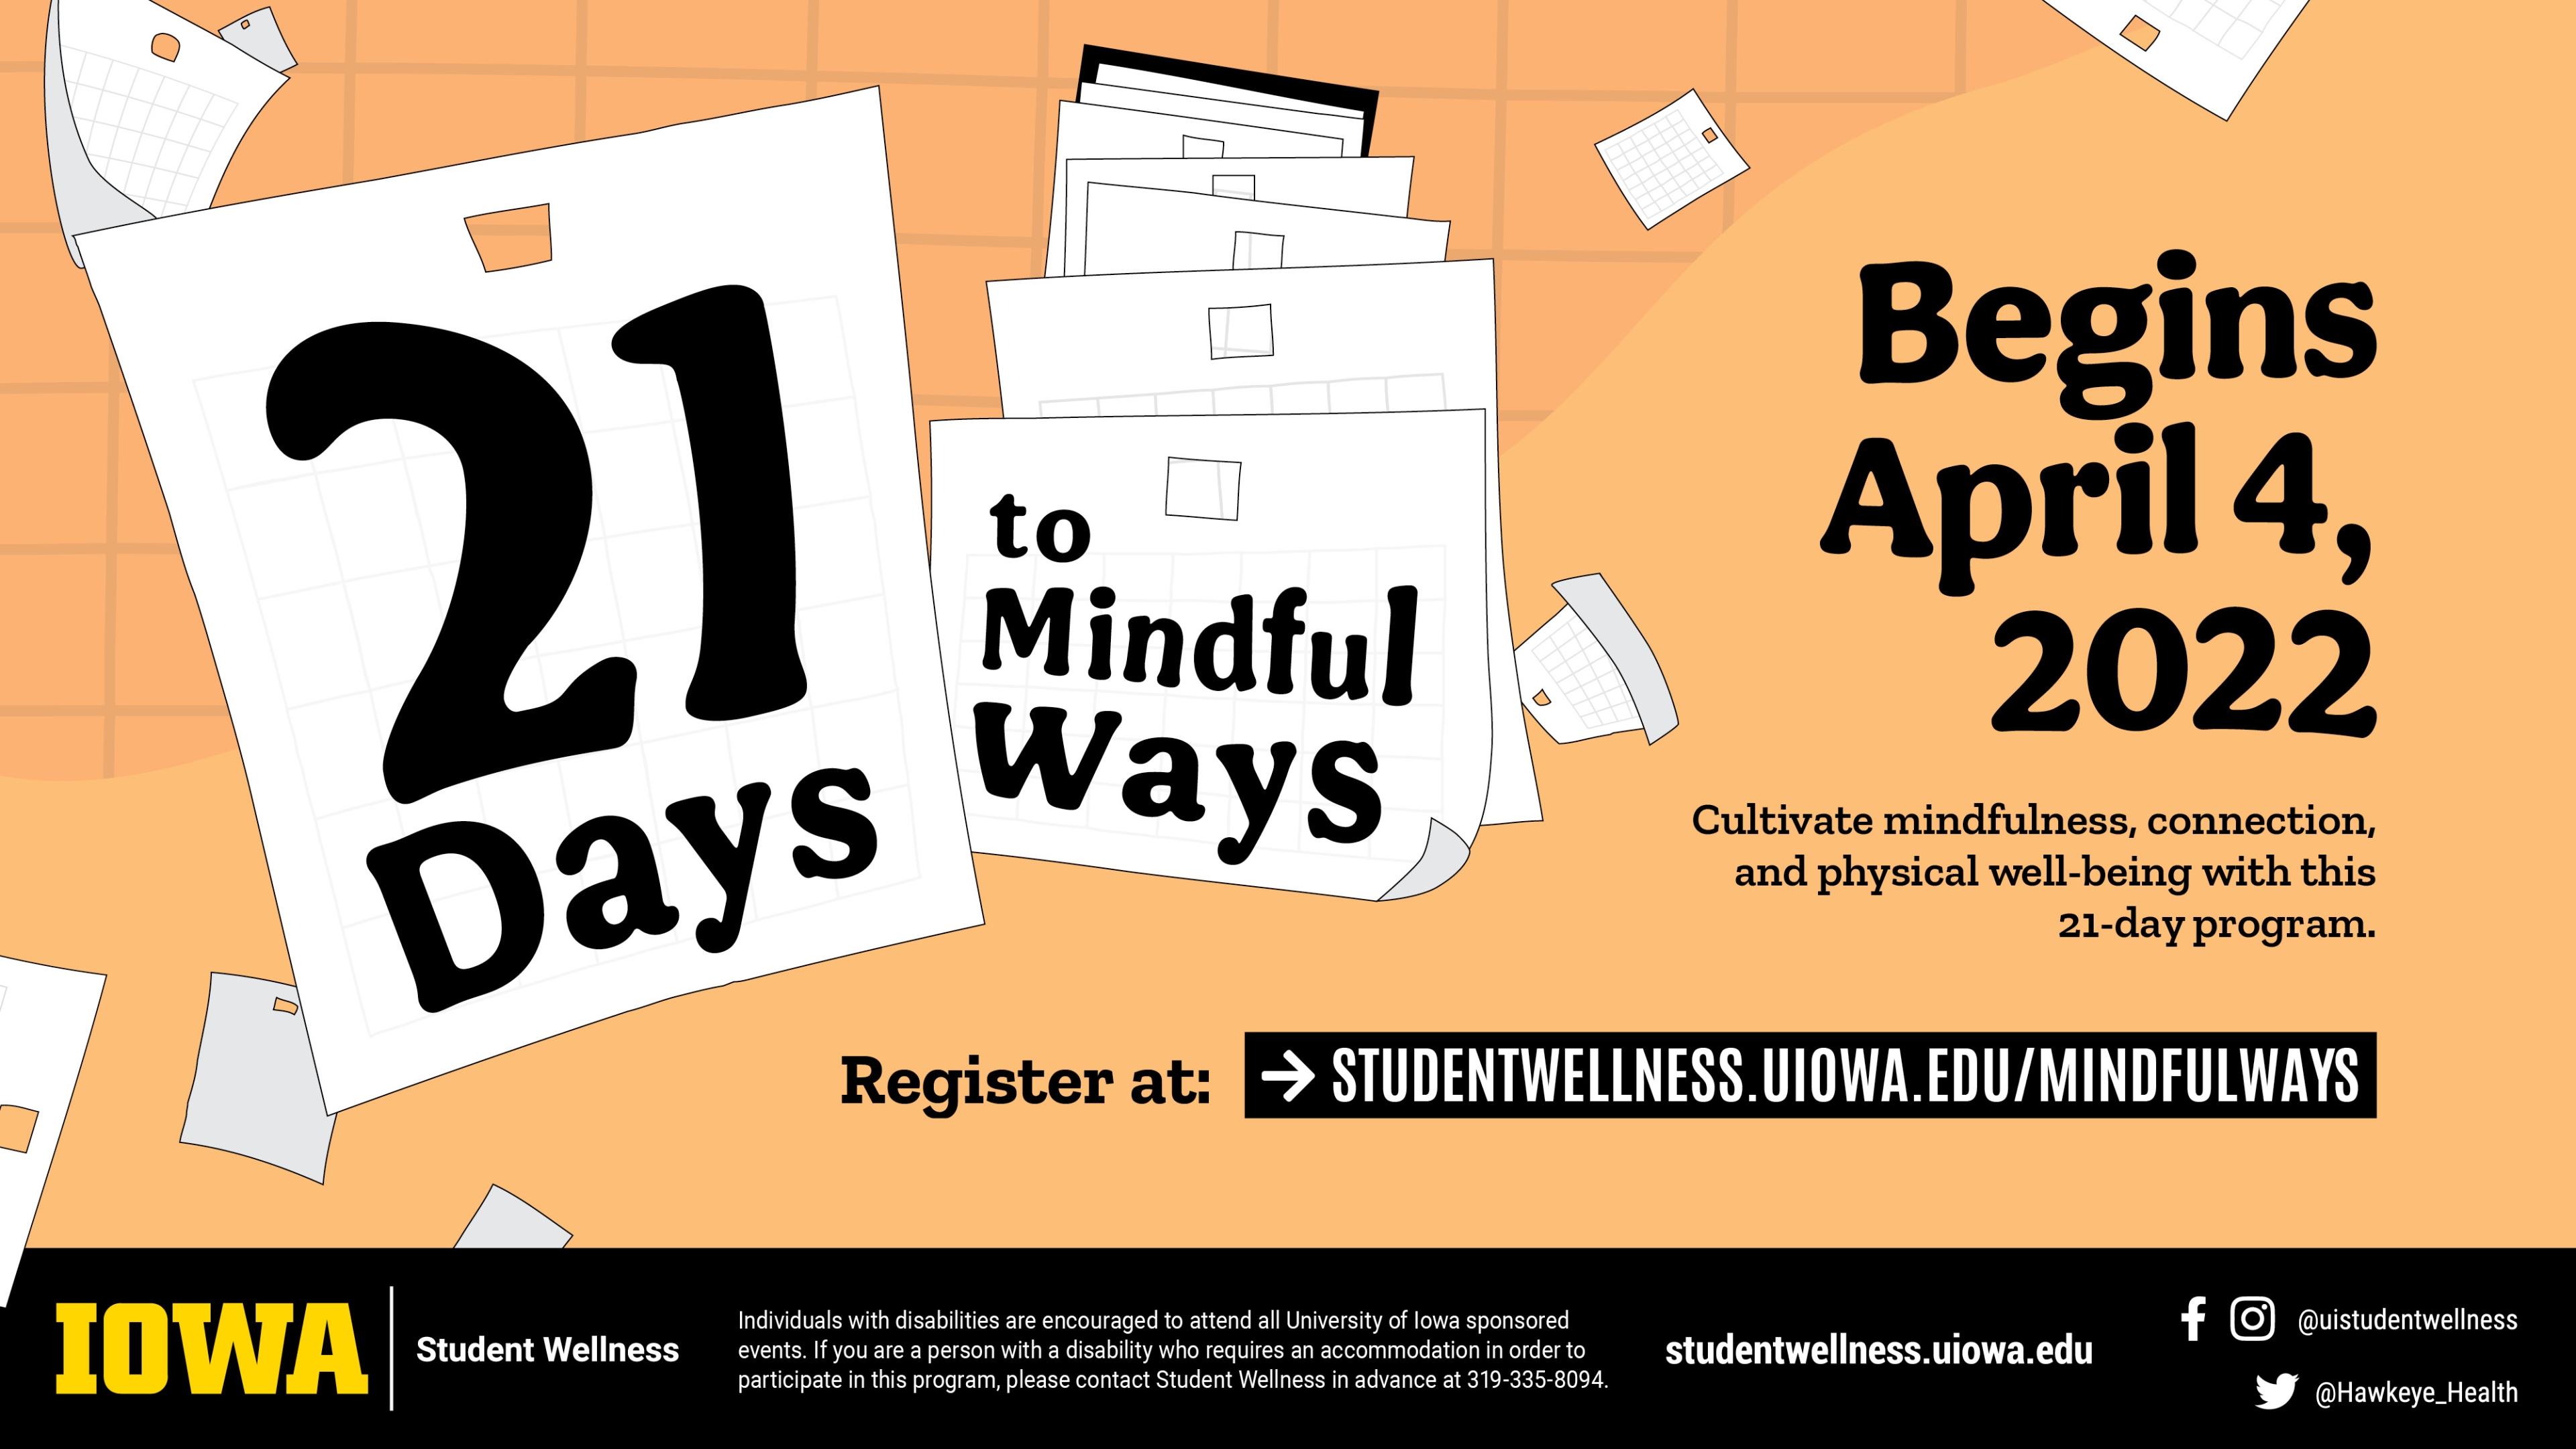 21 Days to Mindful Ways Begins April 4, 2022. Cultivate mindfulness, connection, and physical well-being with this 21-day program. Register at studentwellness.uiowa.edu/mindfulways